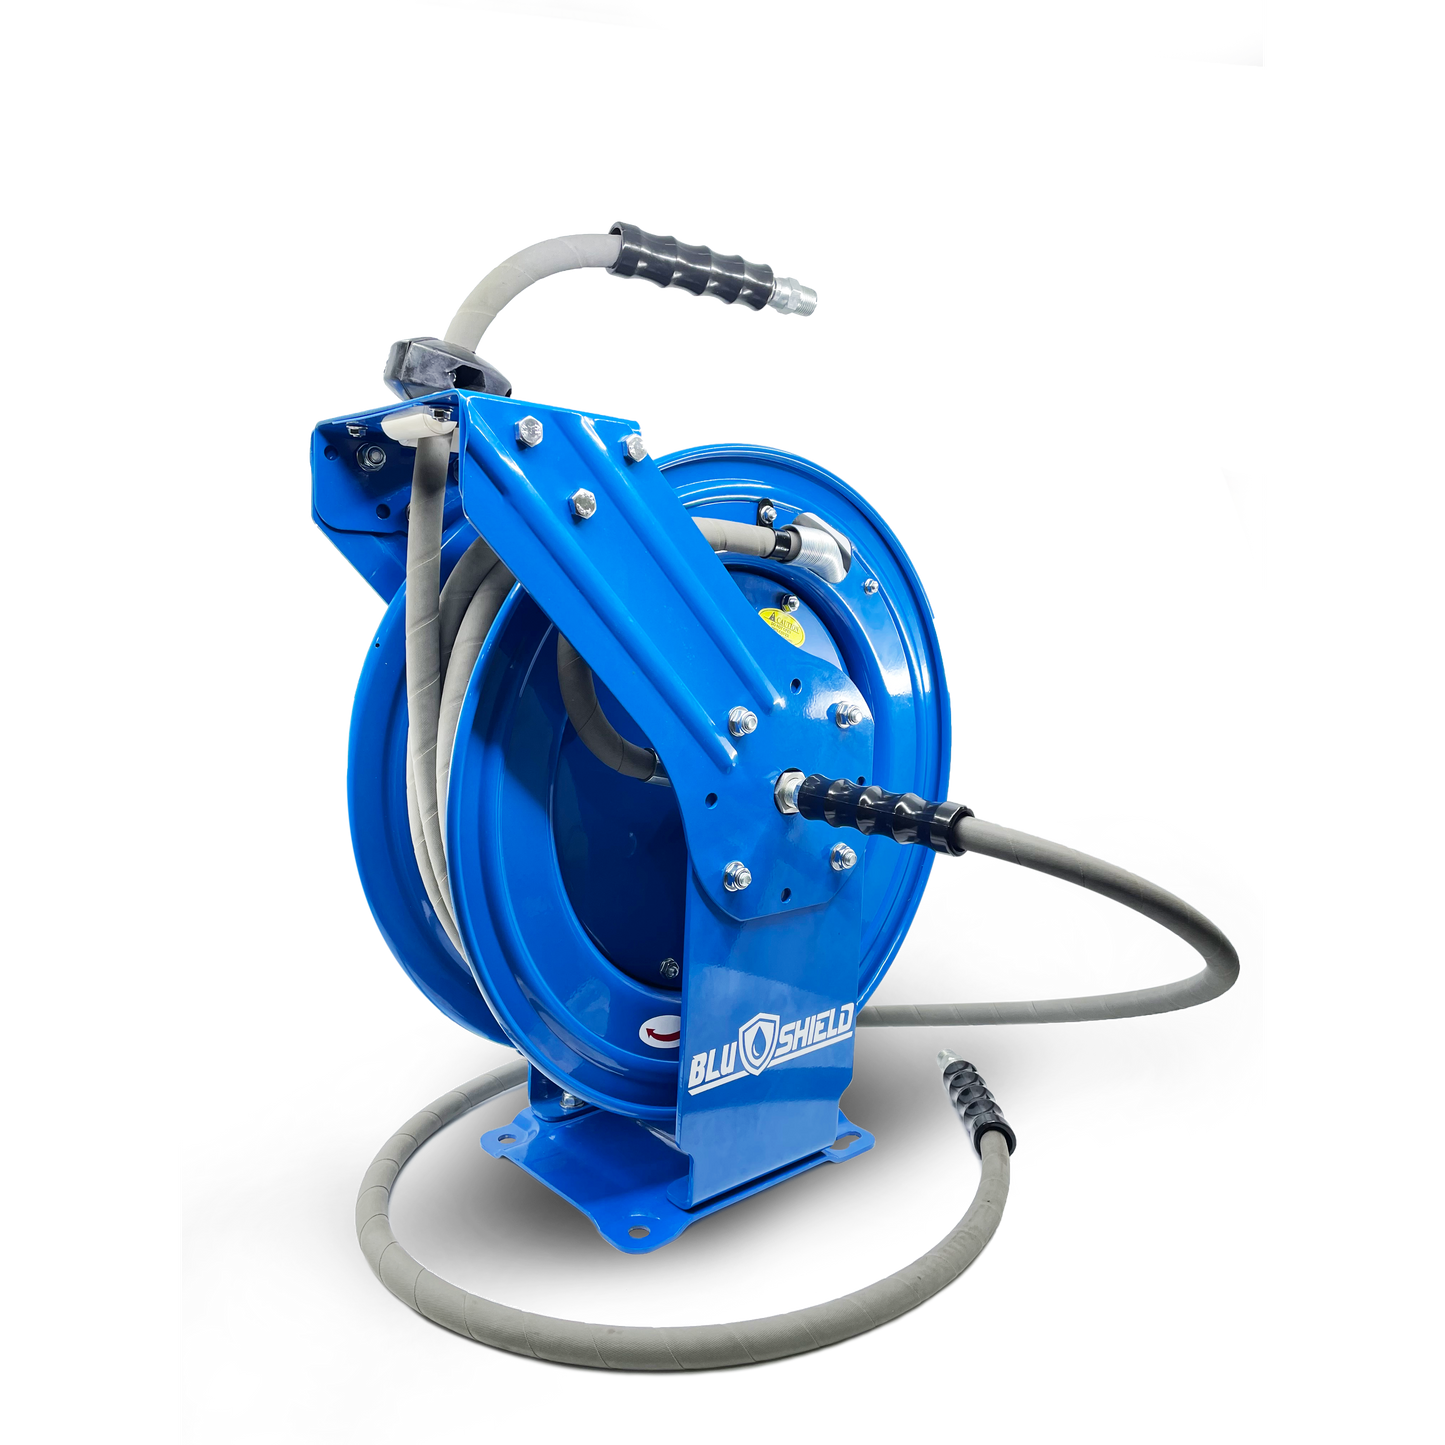 BluShield 3/8" Pressure Washer Hose Reel with 4100PSI Aramid Braided Non Marking Hose, Quick Connect Coupler, 6' Lead-in Hose, Dual Arm Heavy Duty